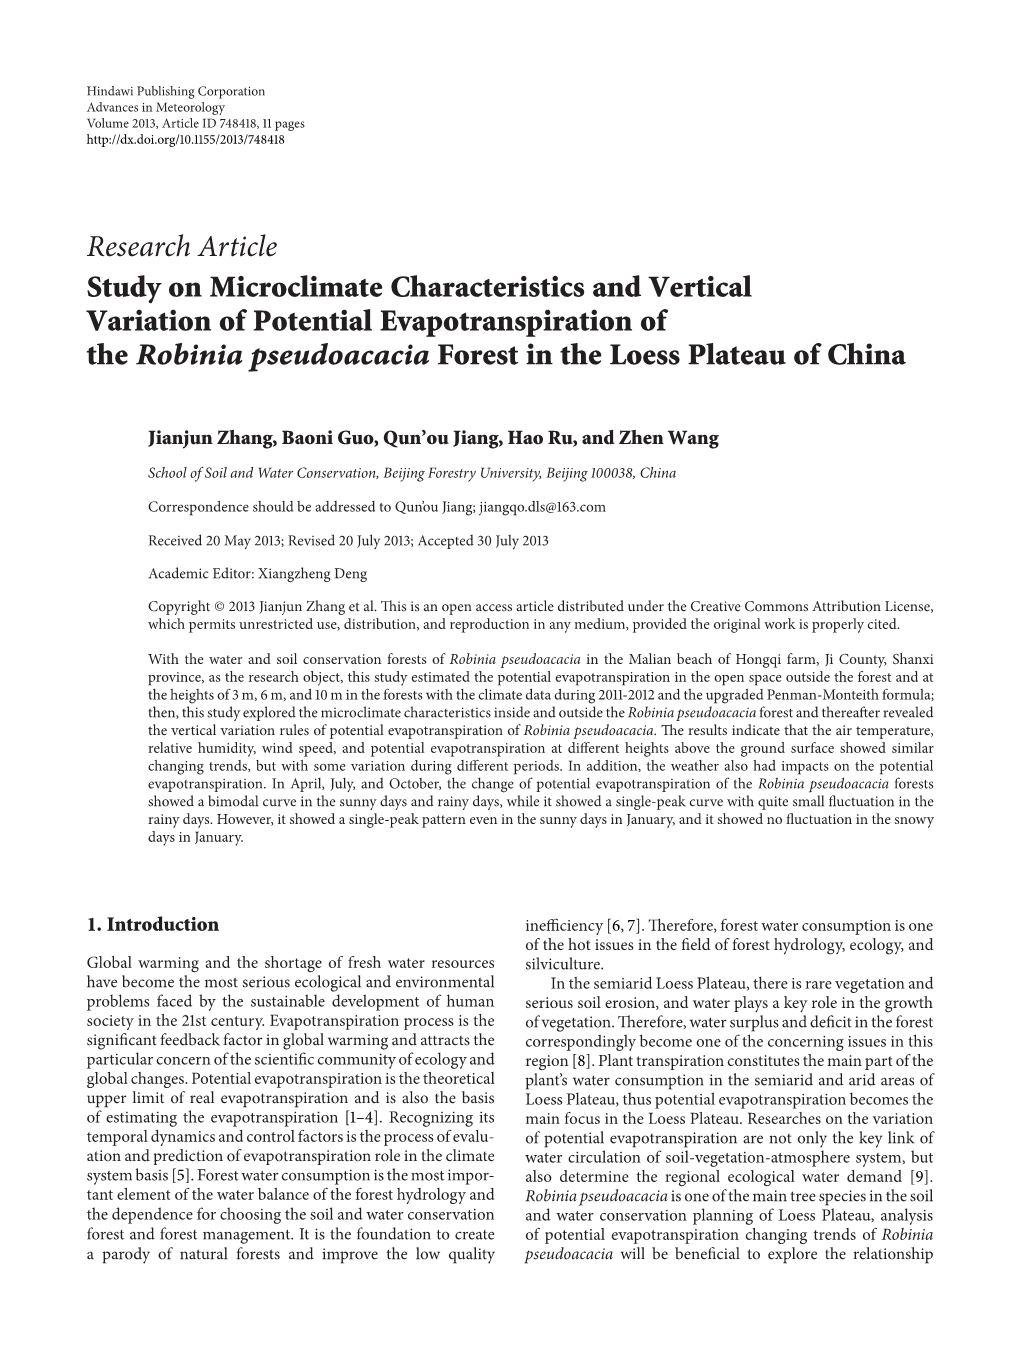 Study on Microclimate Characteristics and Vertical Variation of Potential Evapotranspiration of the Robinia Pseudoacacia Forest in the Loess Plateau of China